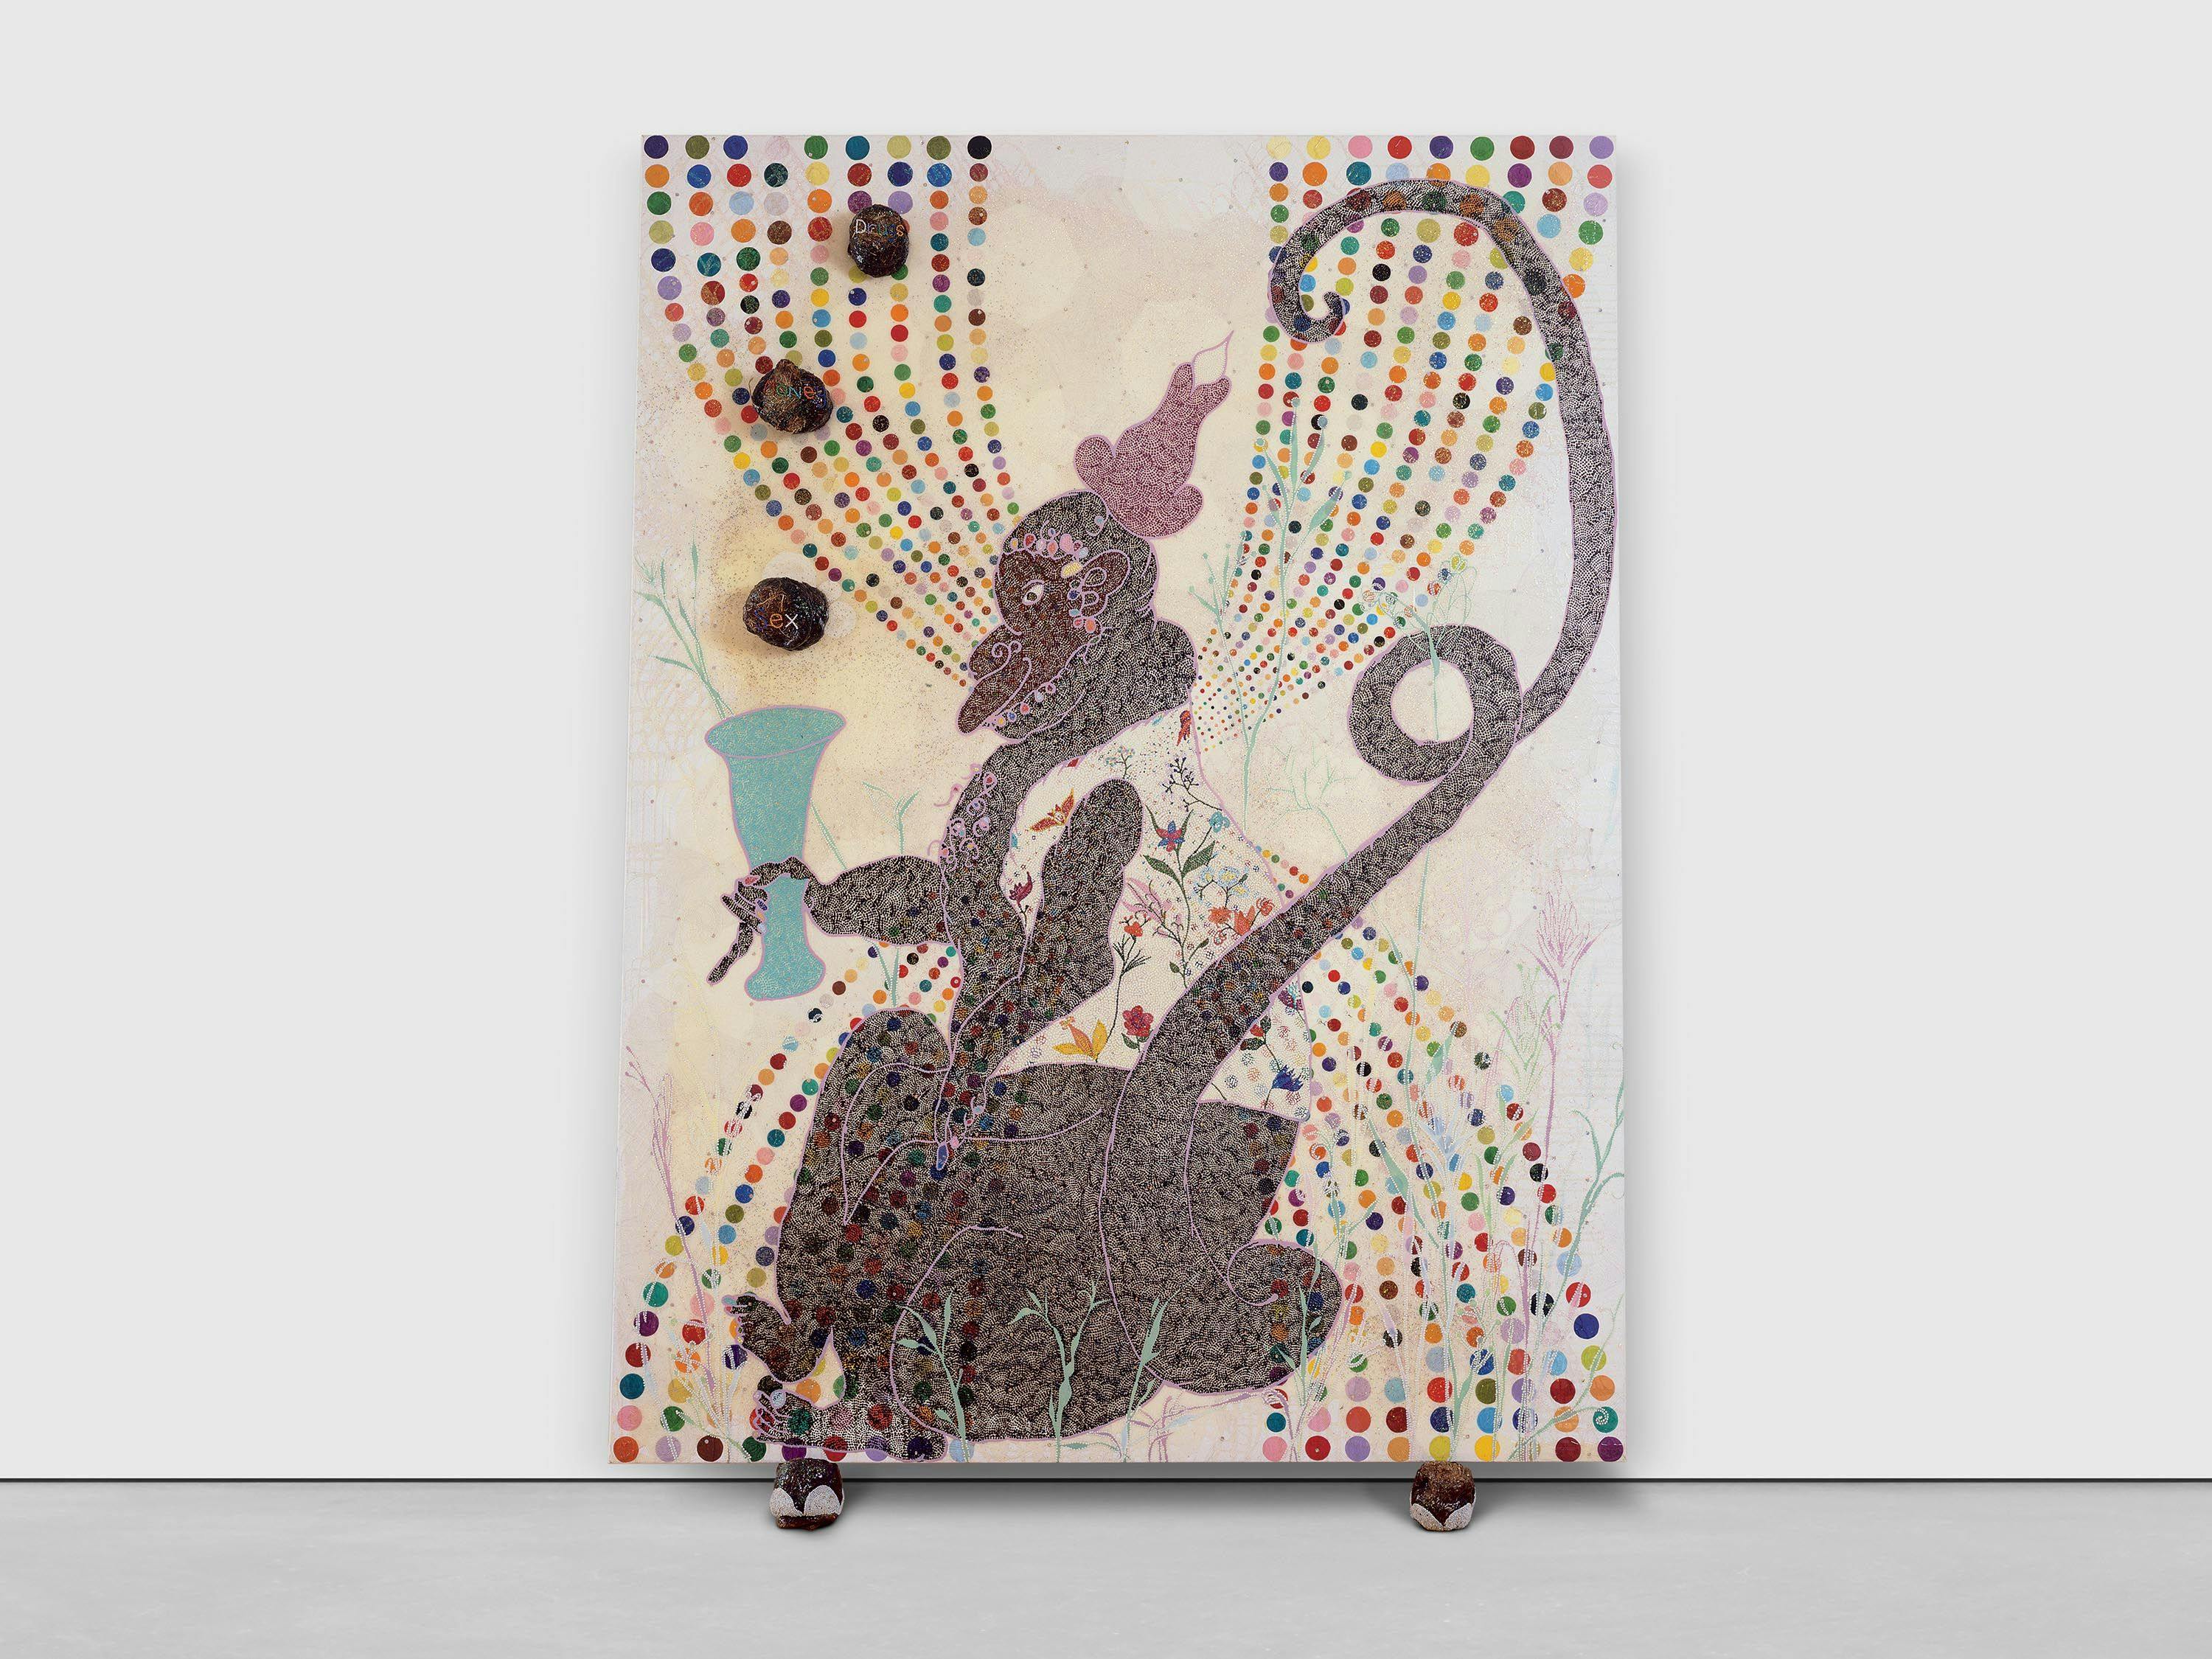 A mixed media artwork by Chris Ofili, titledMonkey Magic - Sex, Money and Drugs, dated 1999.